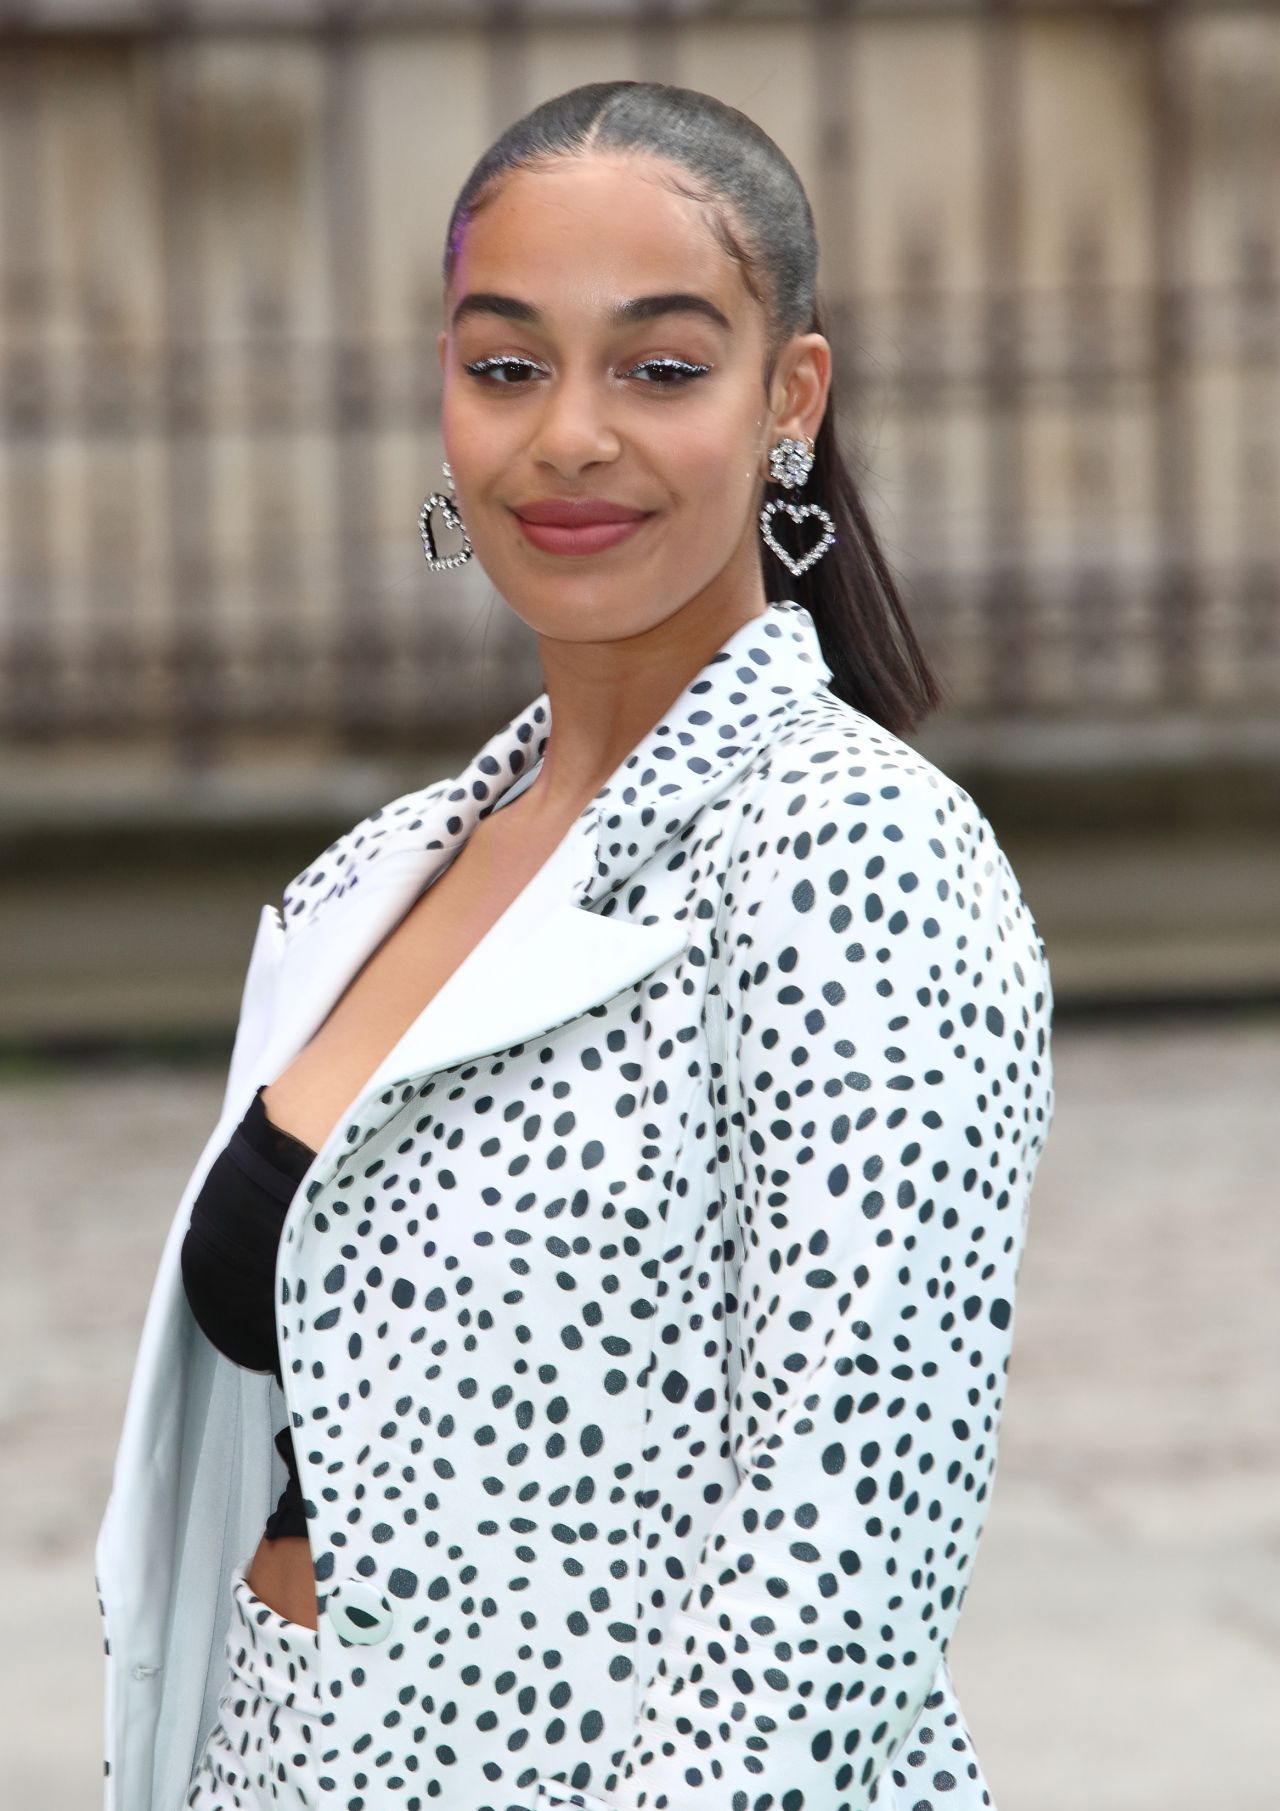 jorja-smith-royal-academy-of-arts-summer-exhibition-party-2019-in-london-2.jpg